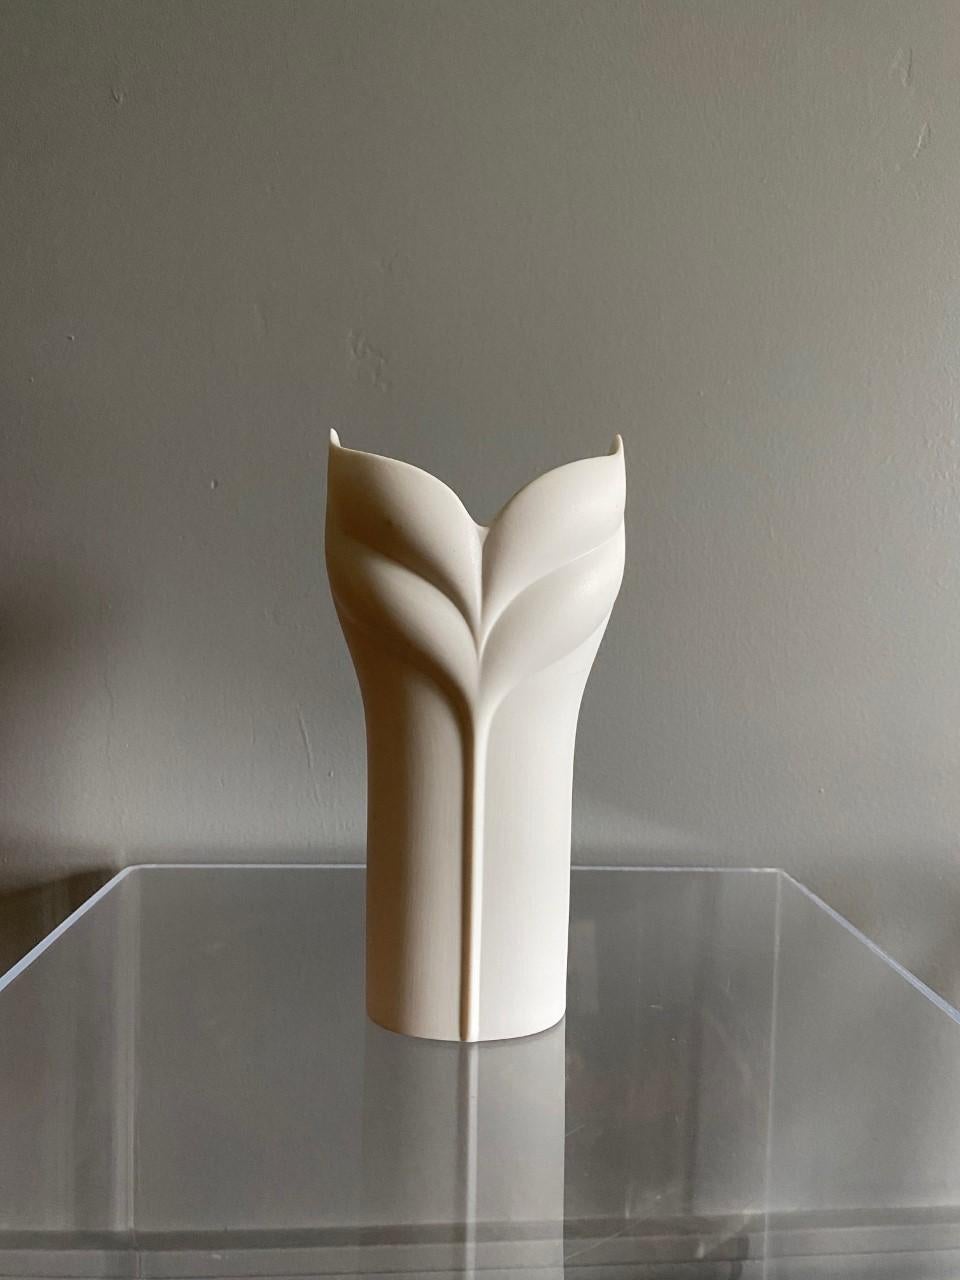 Beautiful and elegant white bisque op art vase by Uta Feyl for Rosenthal Studio linie. This graphic and romantic piece dates from the 1970s. The beautiful long lines along with the matte white finish give this piece lightness and timelessness. The